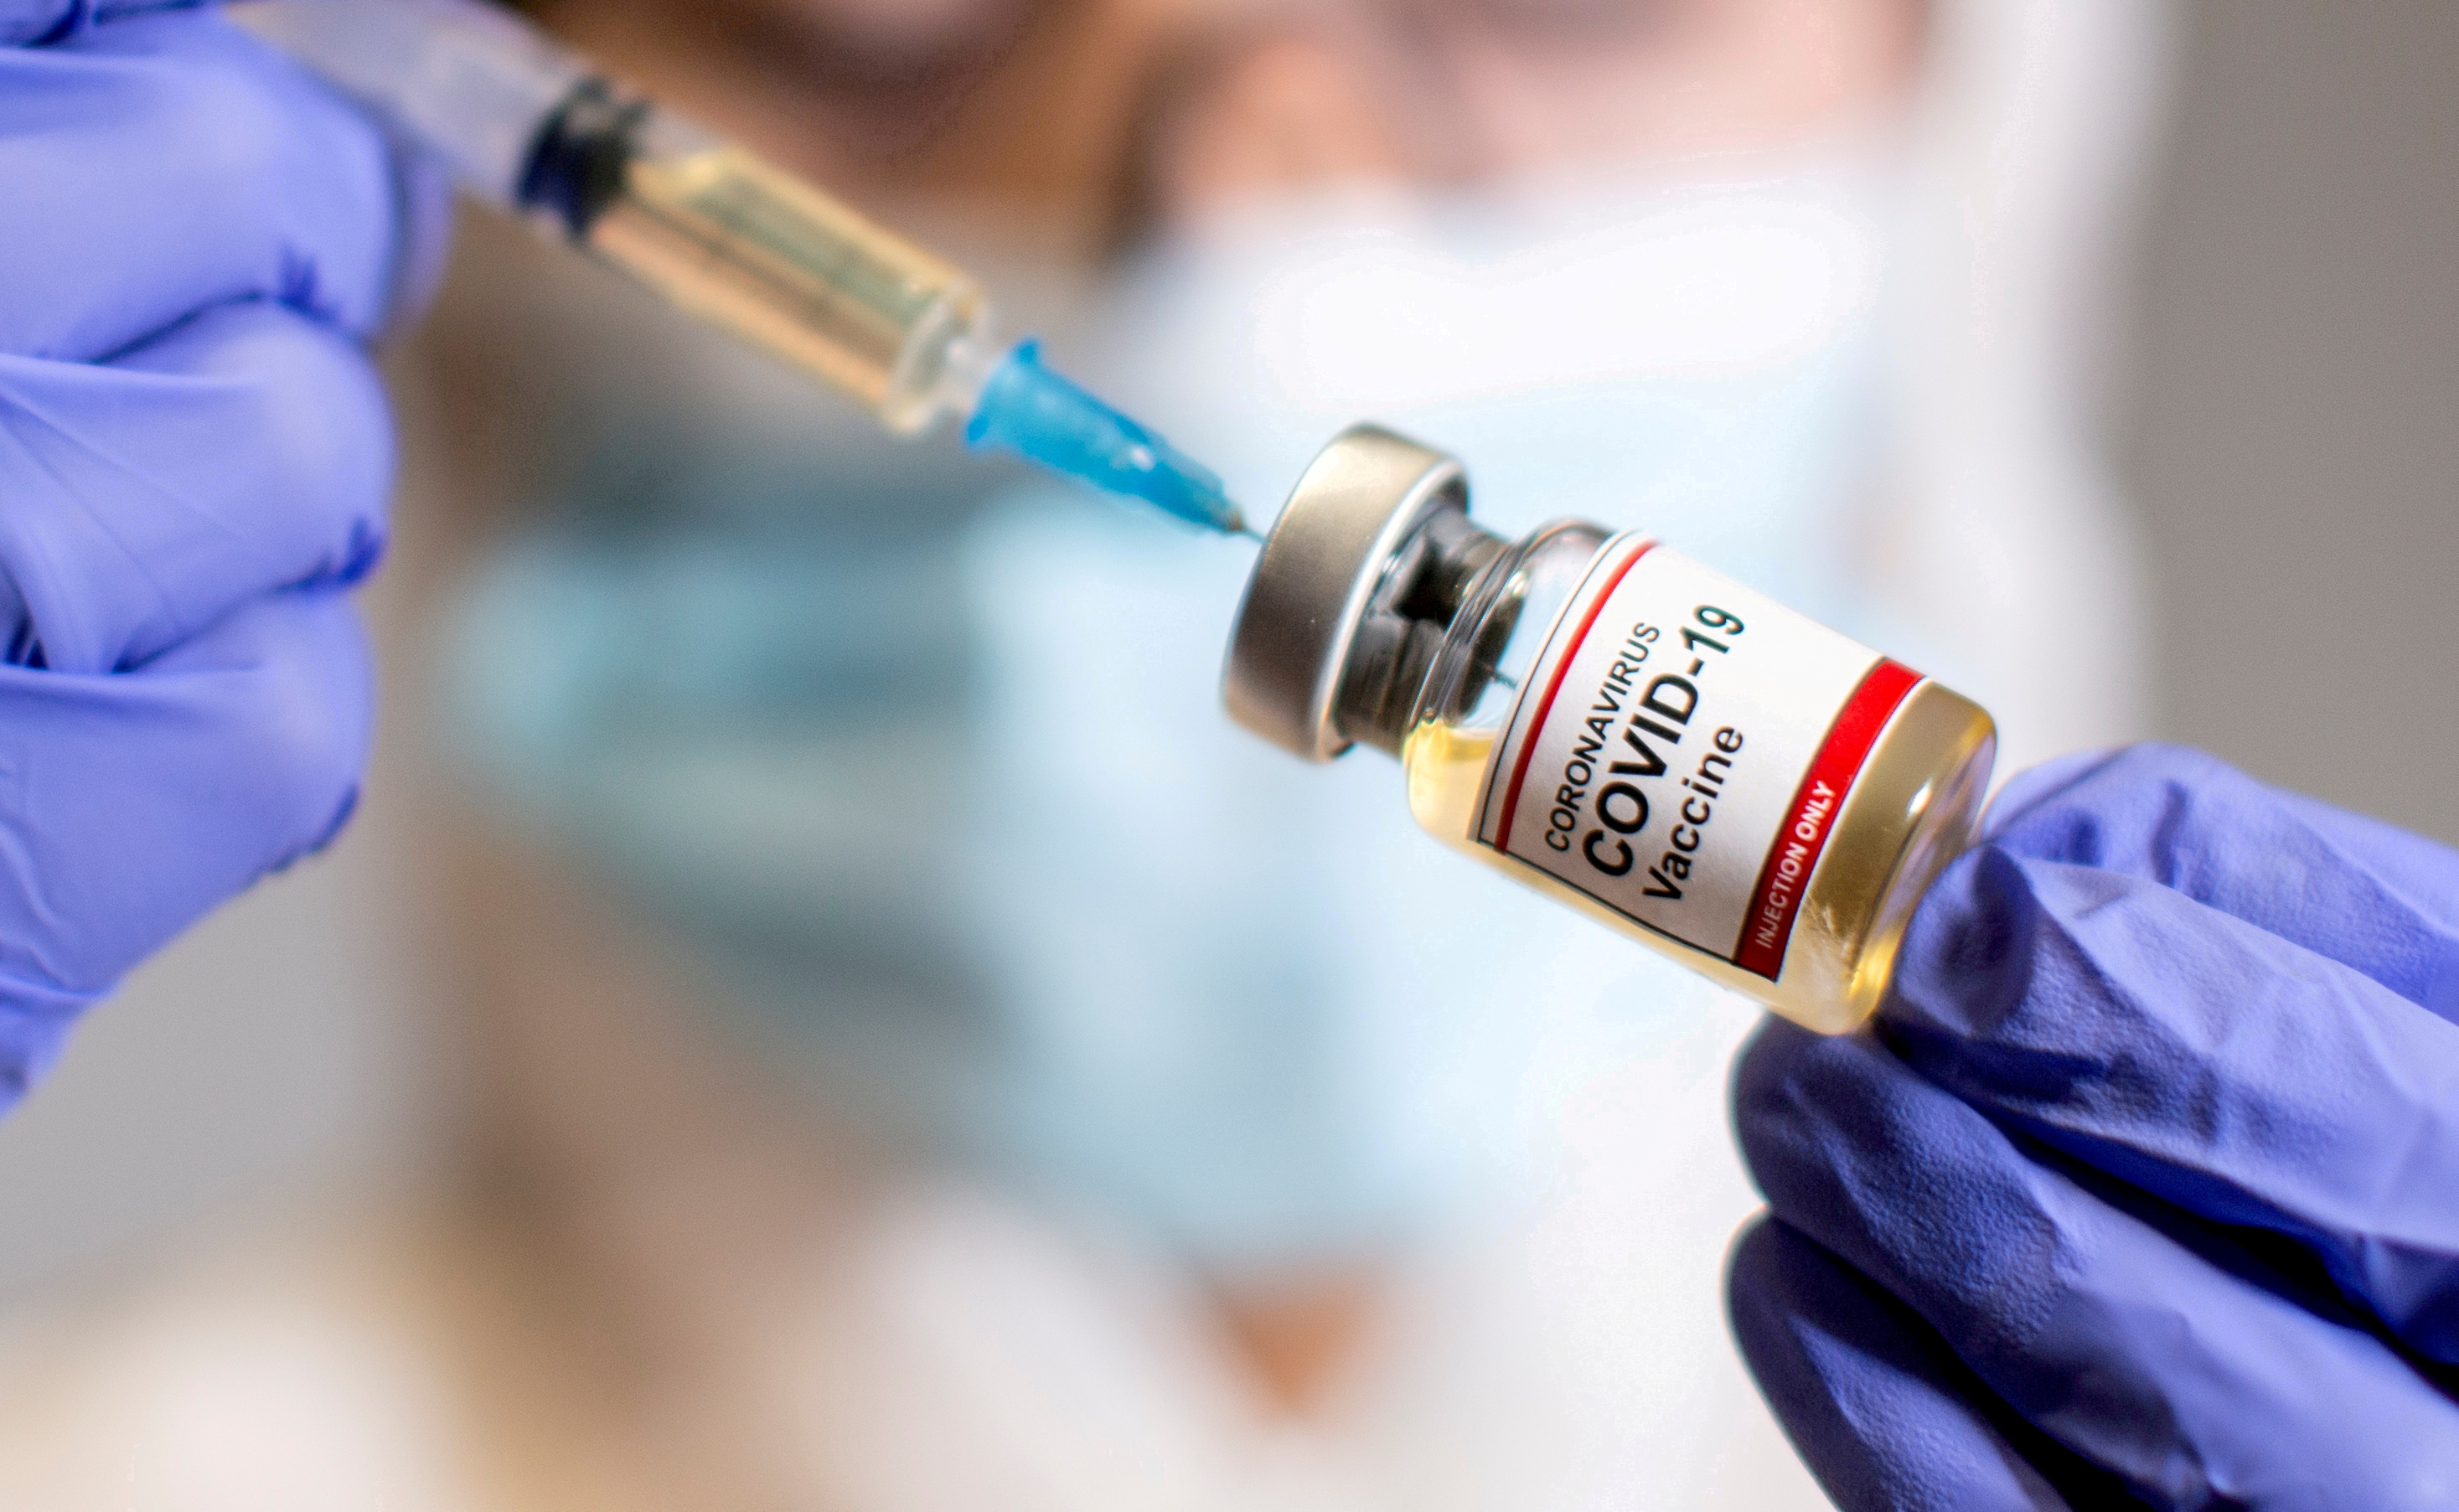 A woman holds a medical syringe and a small bottle labeled "Coronavirus COVID-19 Vaccine